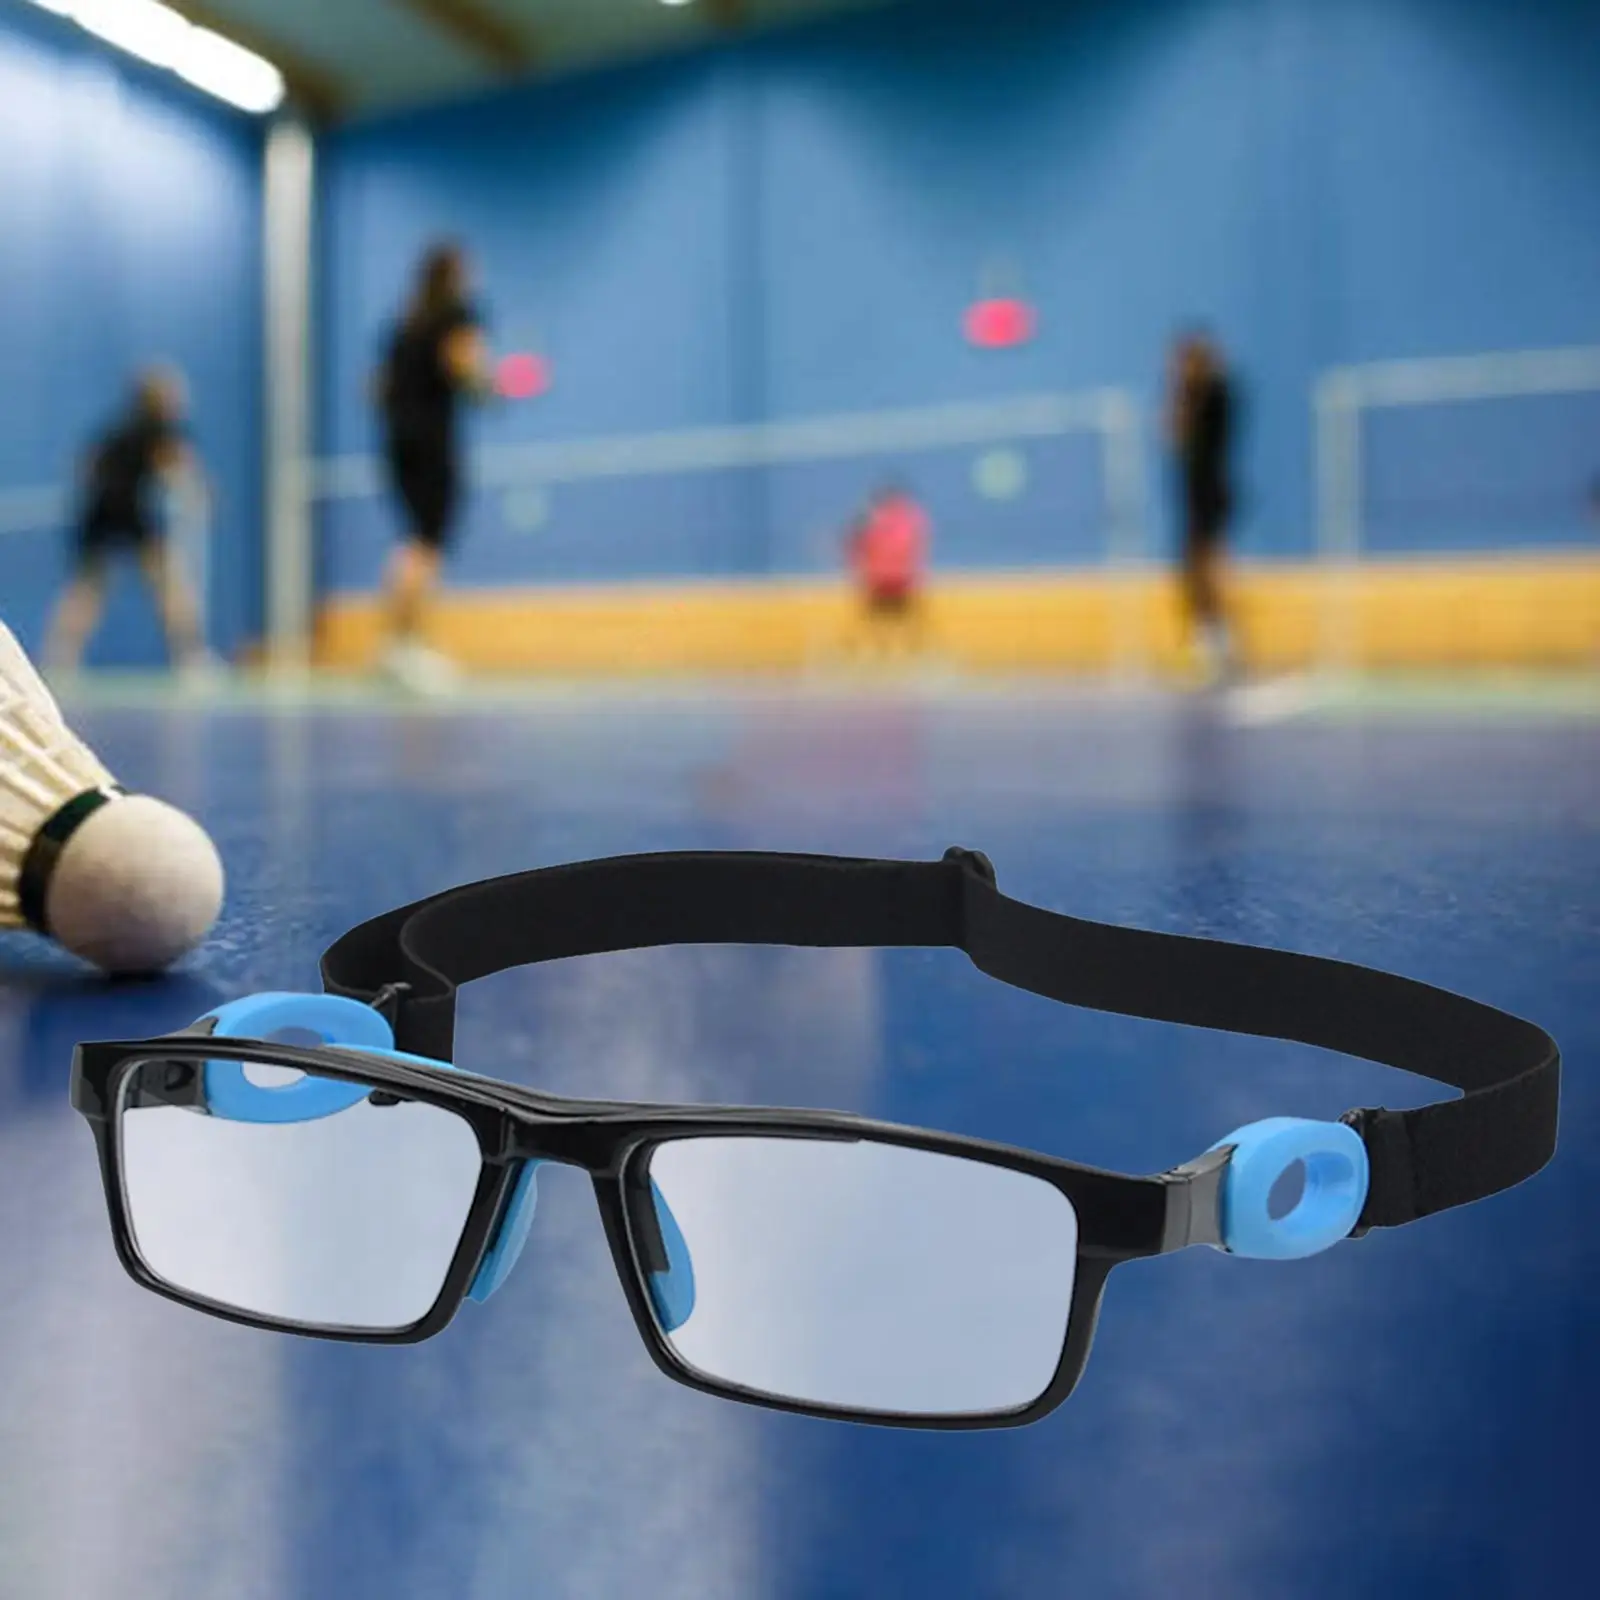 Professional Basketball Glasses Lightweight Wearable for Cycling Tennis